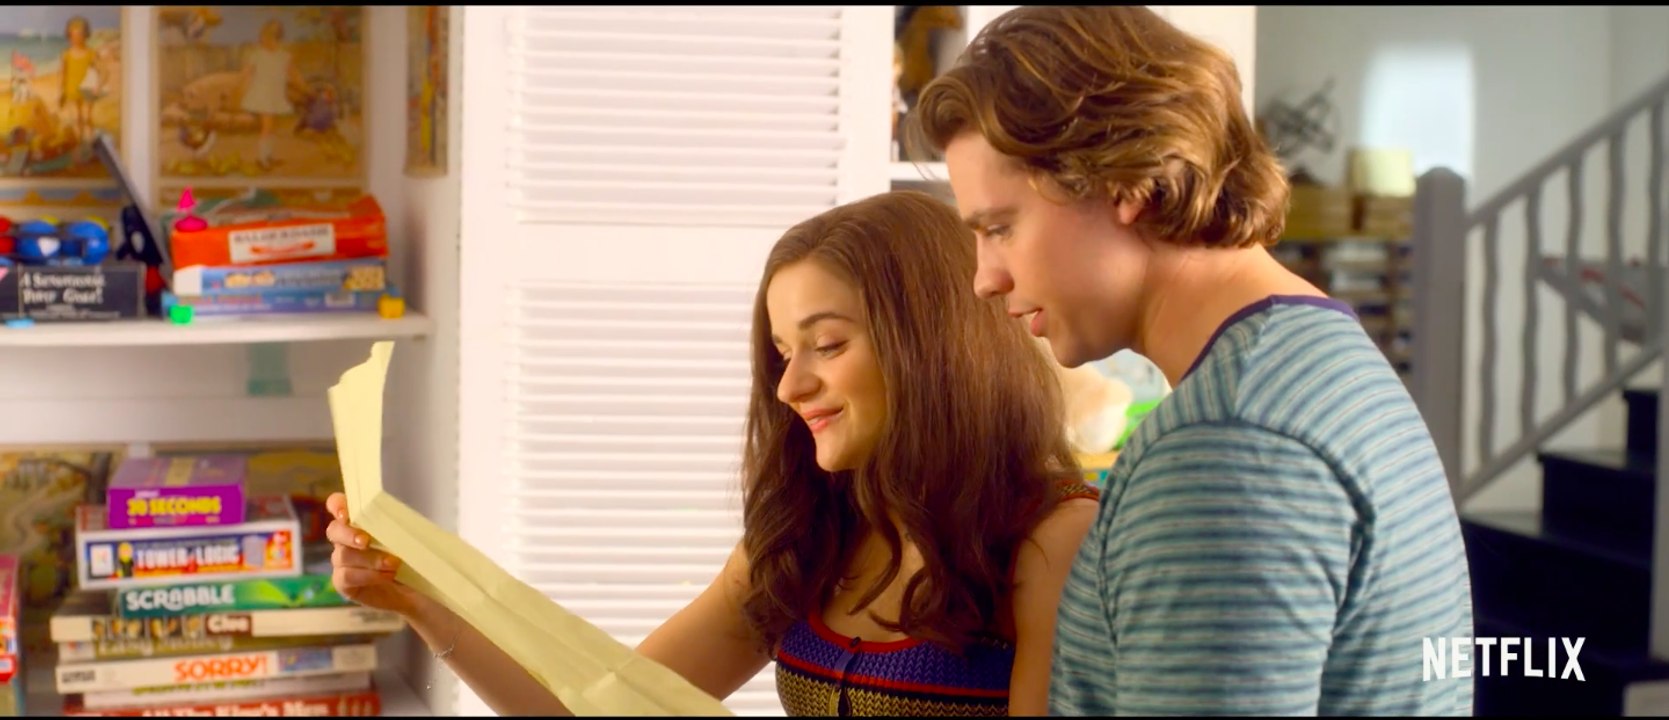 The Kissing Booth 3 Trailer & Teaser